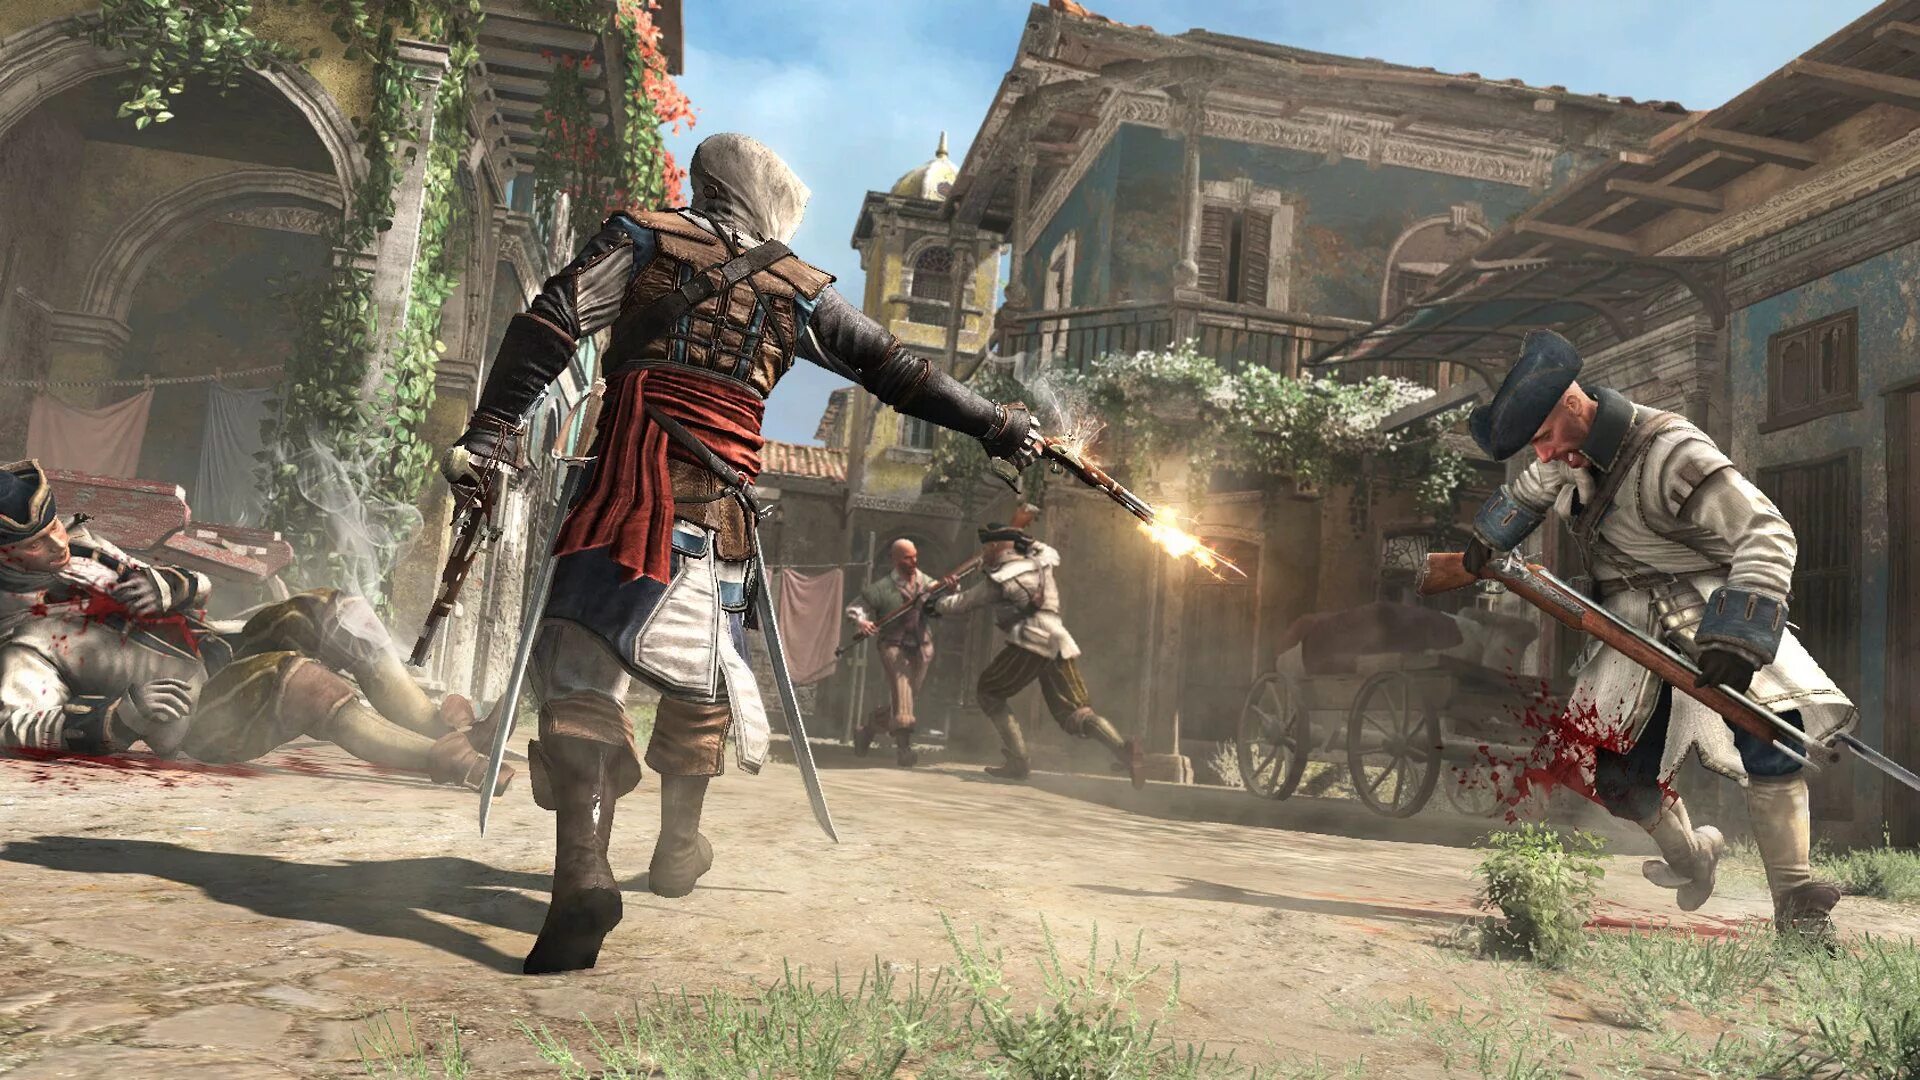 Assassins игра ps4. Assassin s Creed игра. Ассасин Крид 4 ПС 4. Assassin's Creed Black Flag ps4. Ассасин 3 ps4.